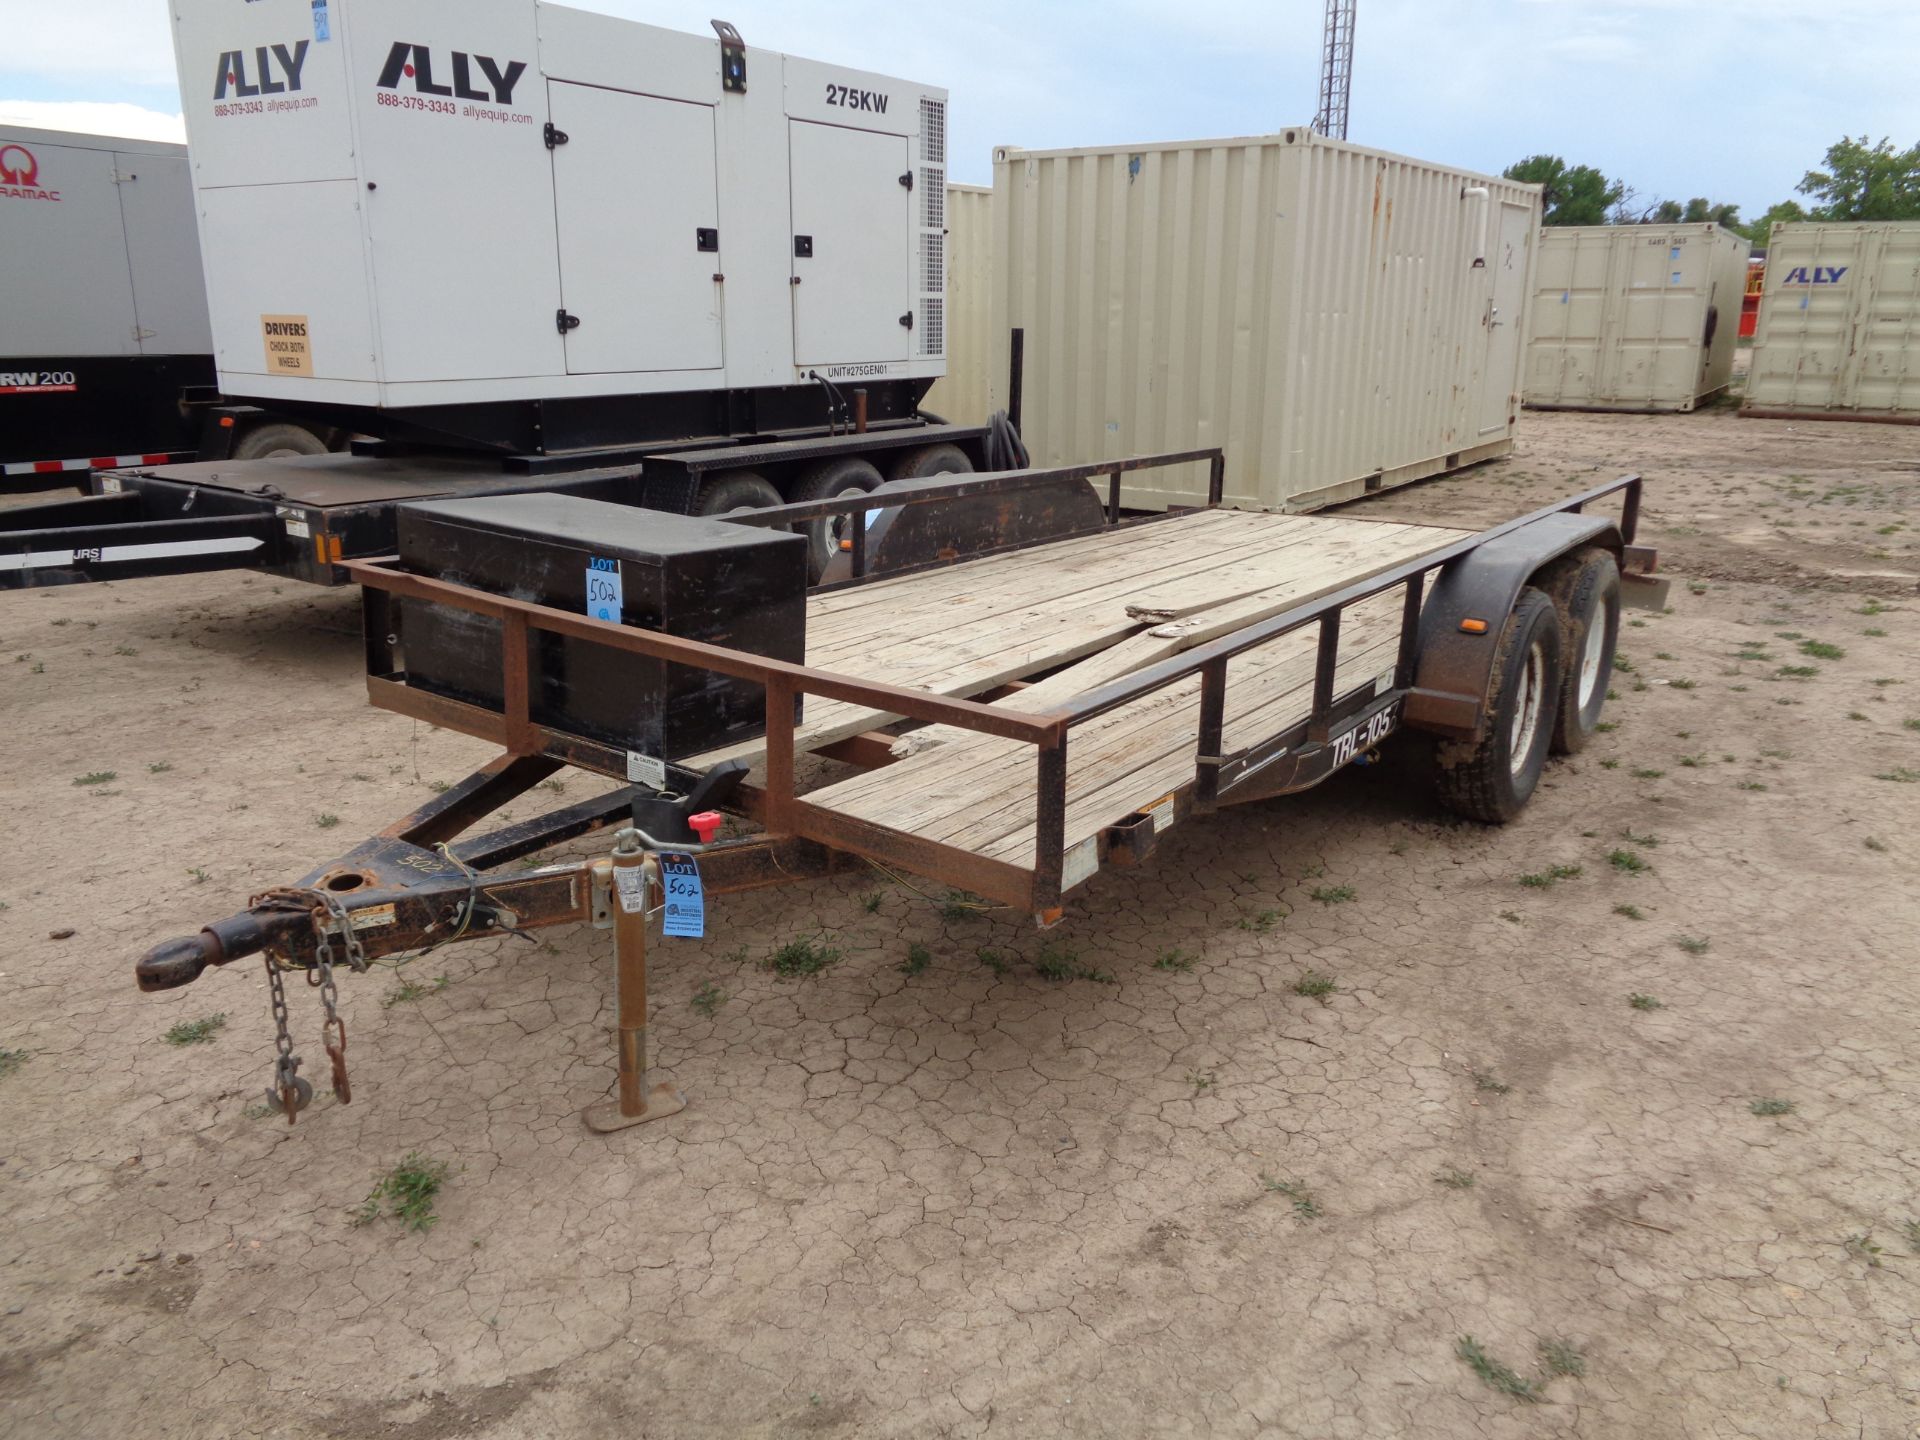 16' UTILITY TRAILER; VIN: UNKNOWN, TANDEM AXLE. (ASSET NUMBER TRL-105)